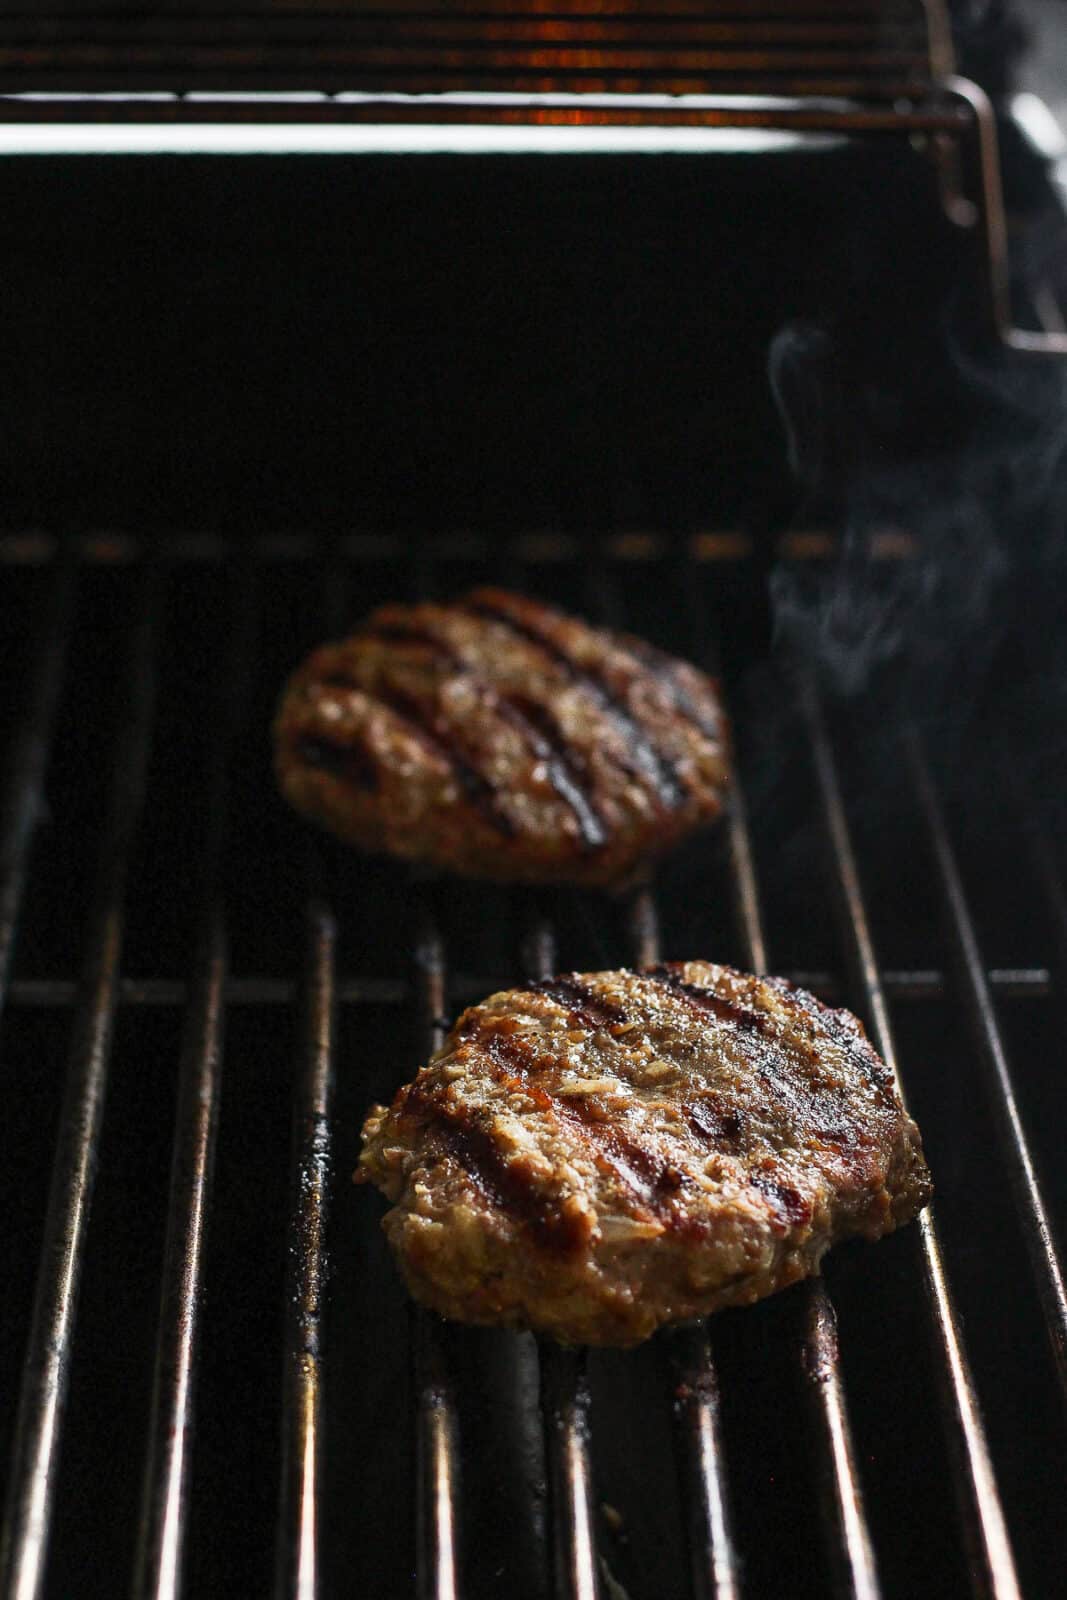 Grilled turkey burgers on the grill.